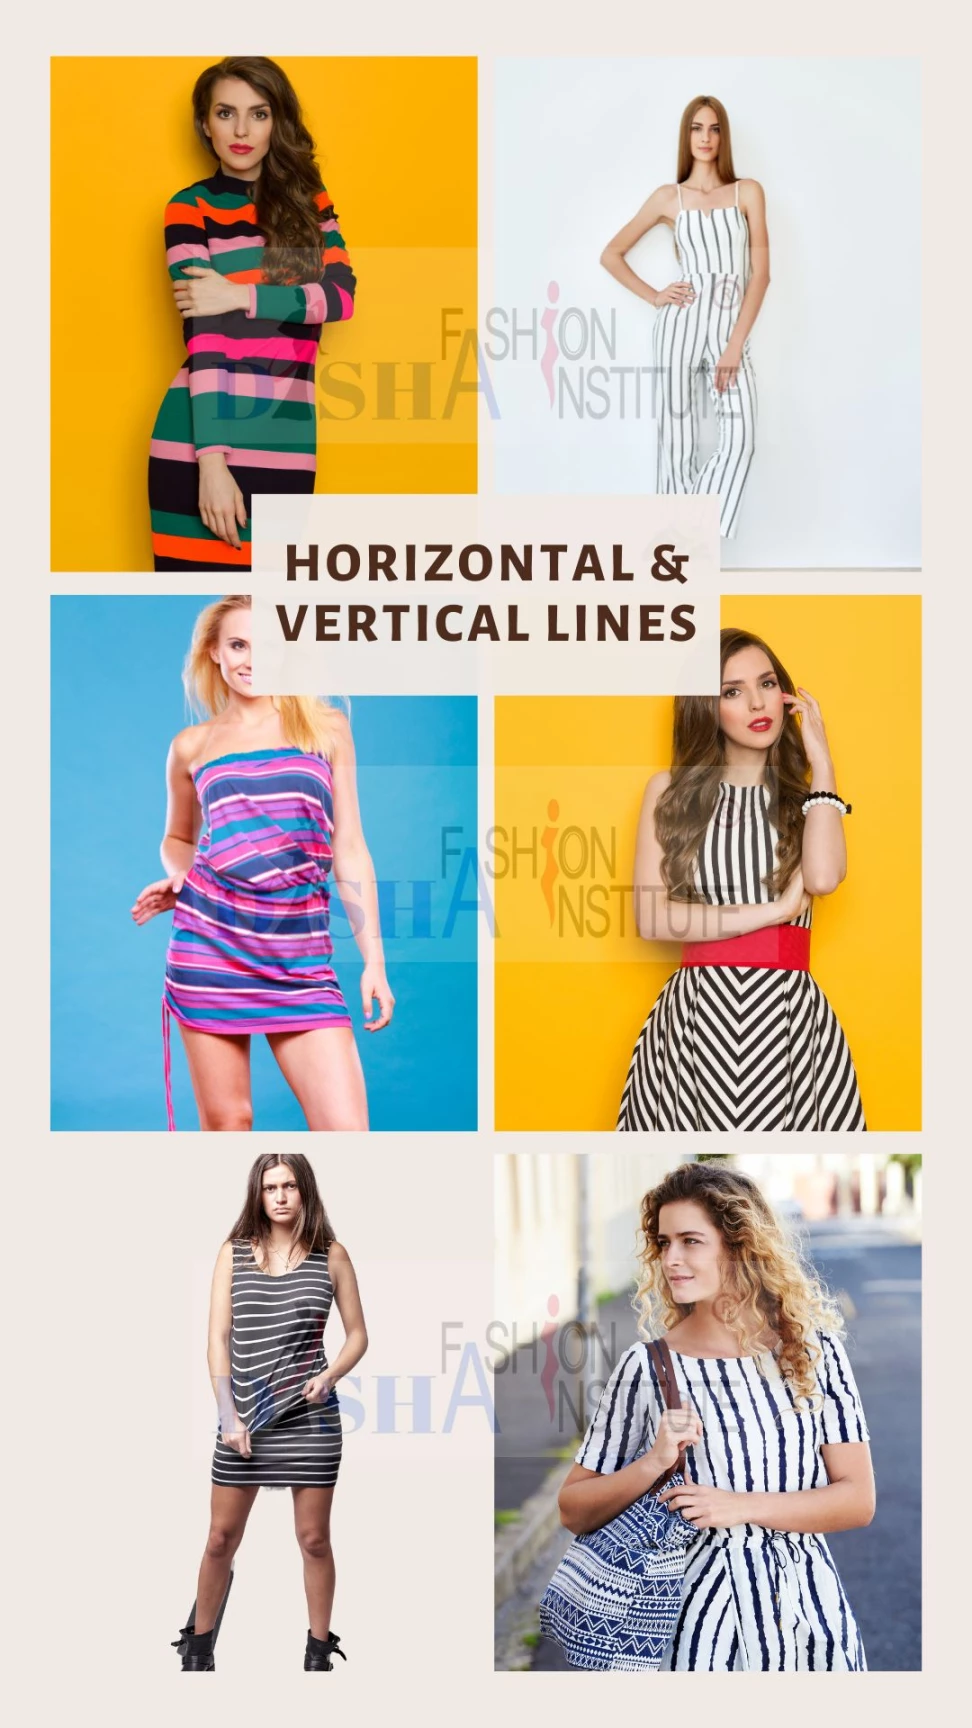 Vertical and Horizontal Lines